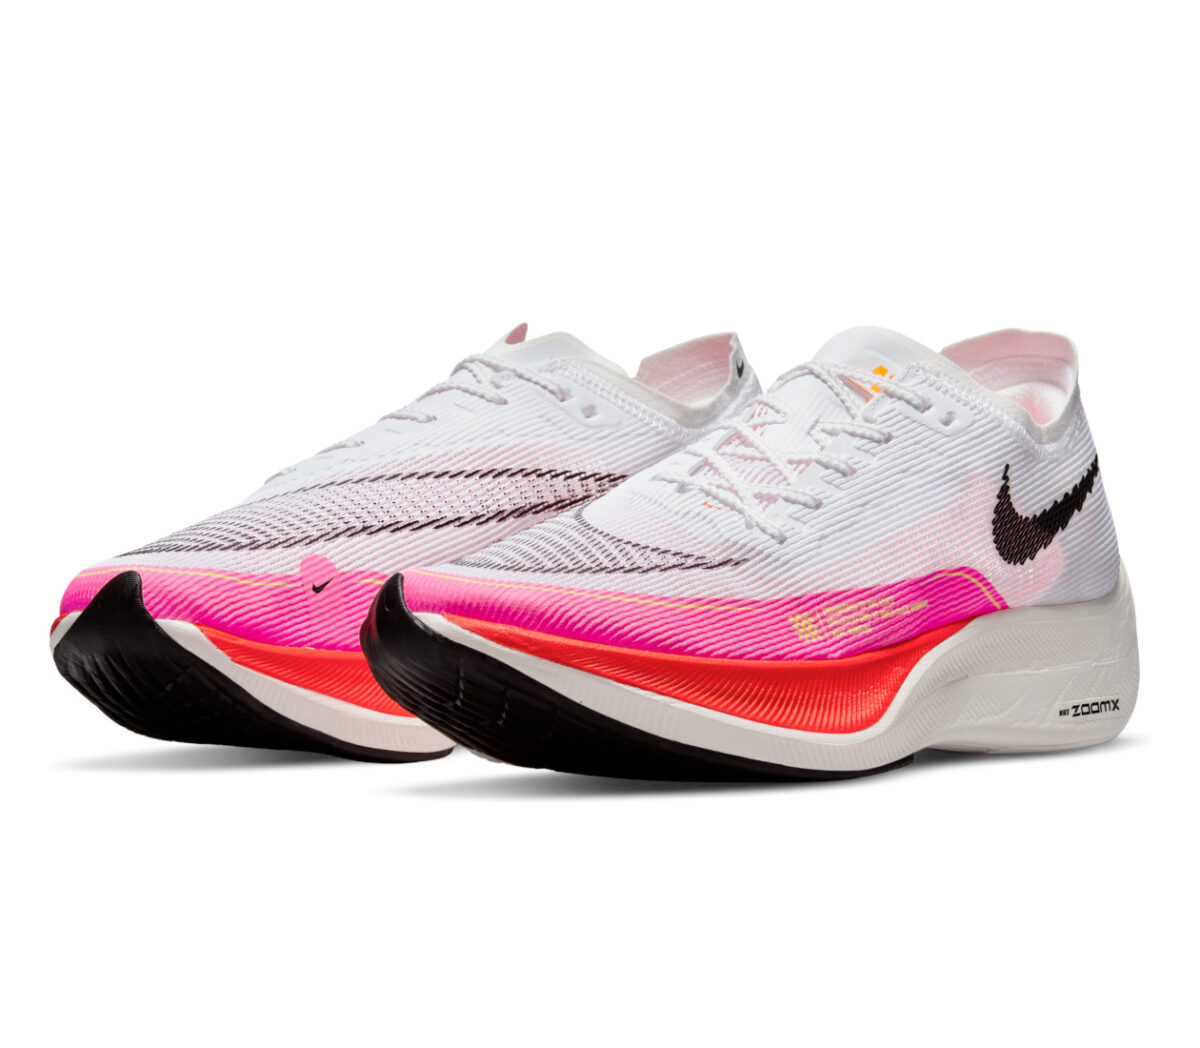 coppia nike zoomx vaporfly 2 next bianche e rosa